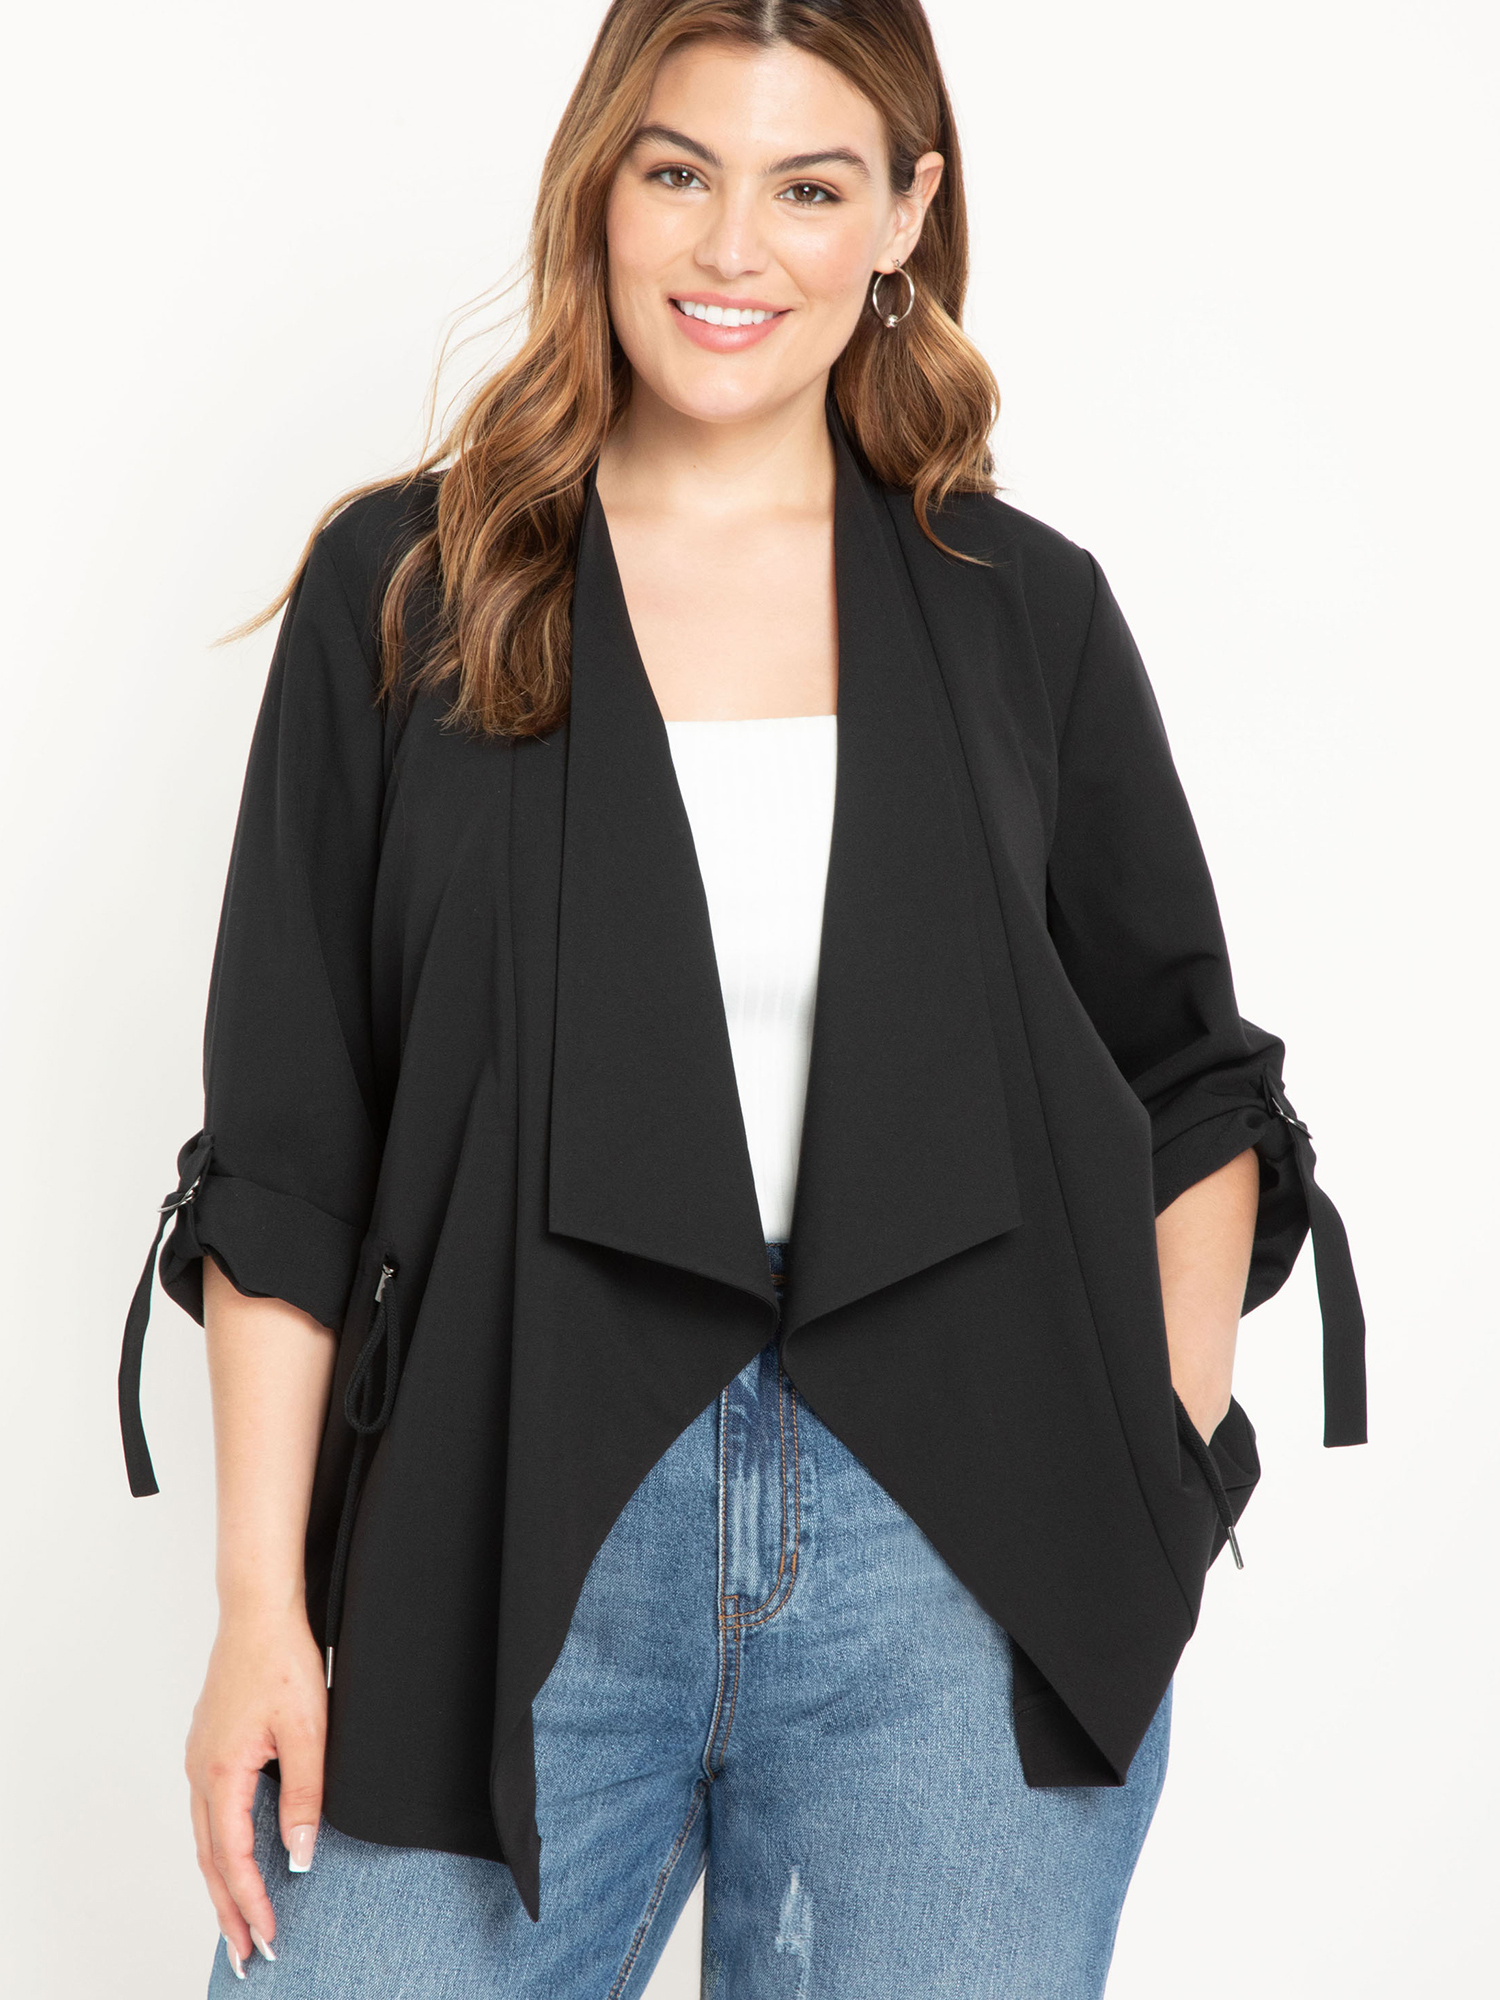 ELOQUII Elements Plus Size Utility Jacket with Waterfall Front - image 1 of 4